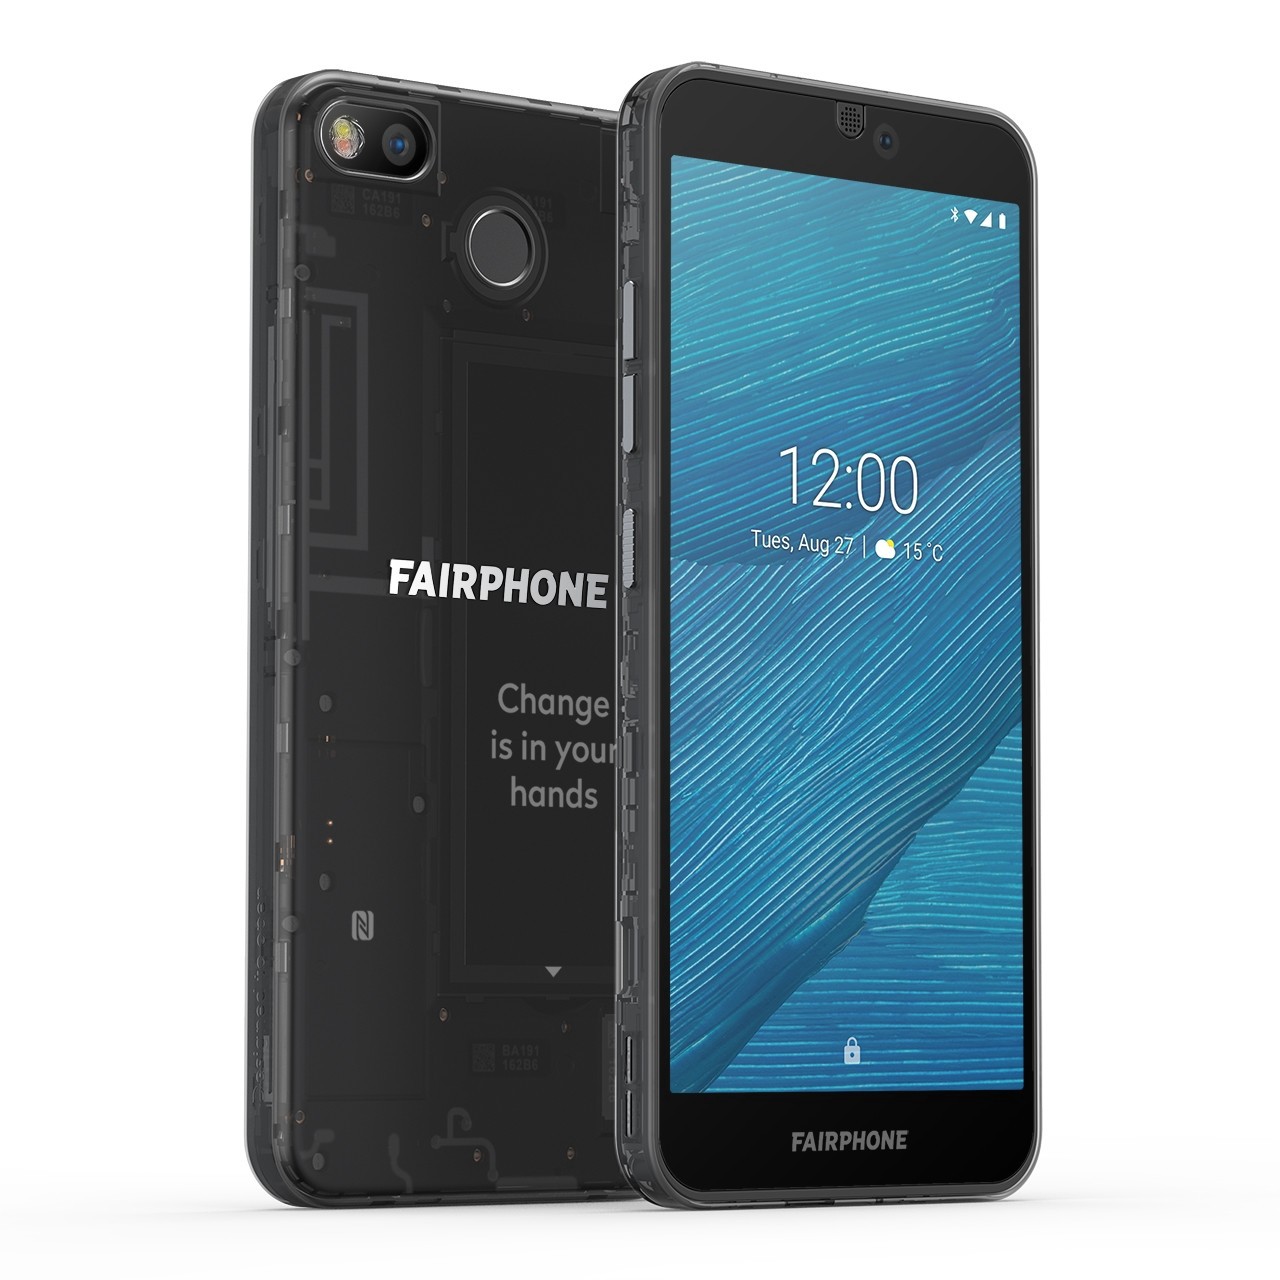 Fairphone’s Sustainable and Repairable mobile phone Launches Out Soon